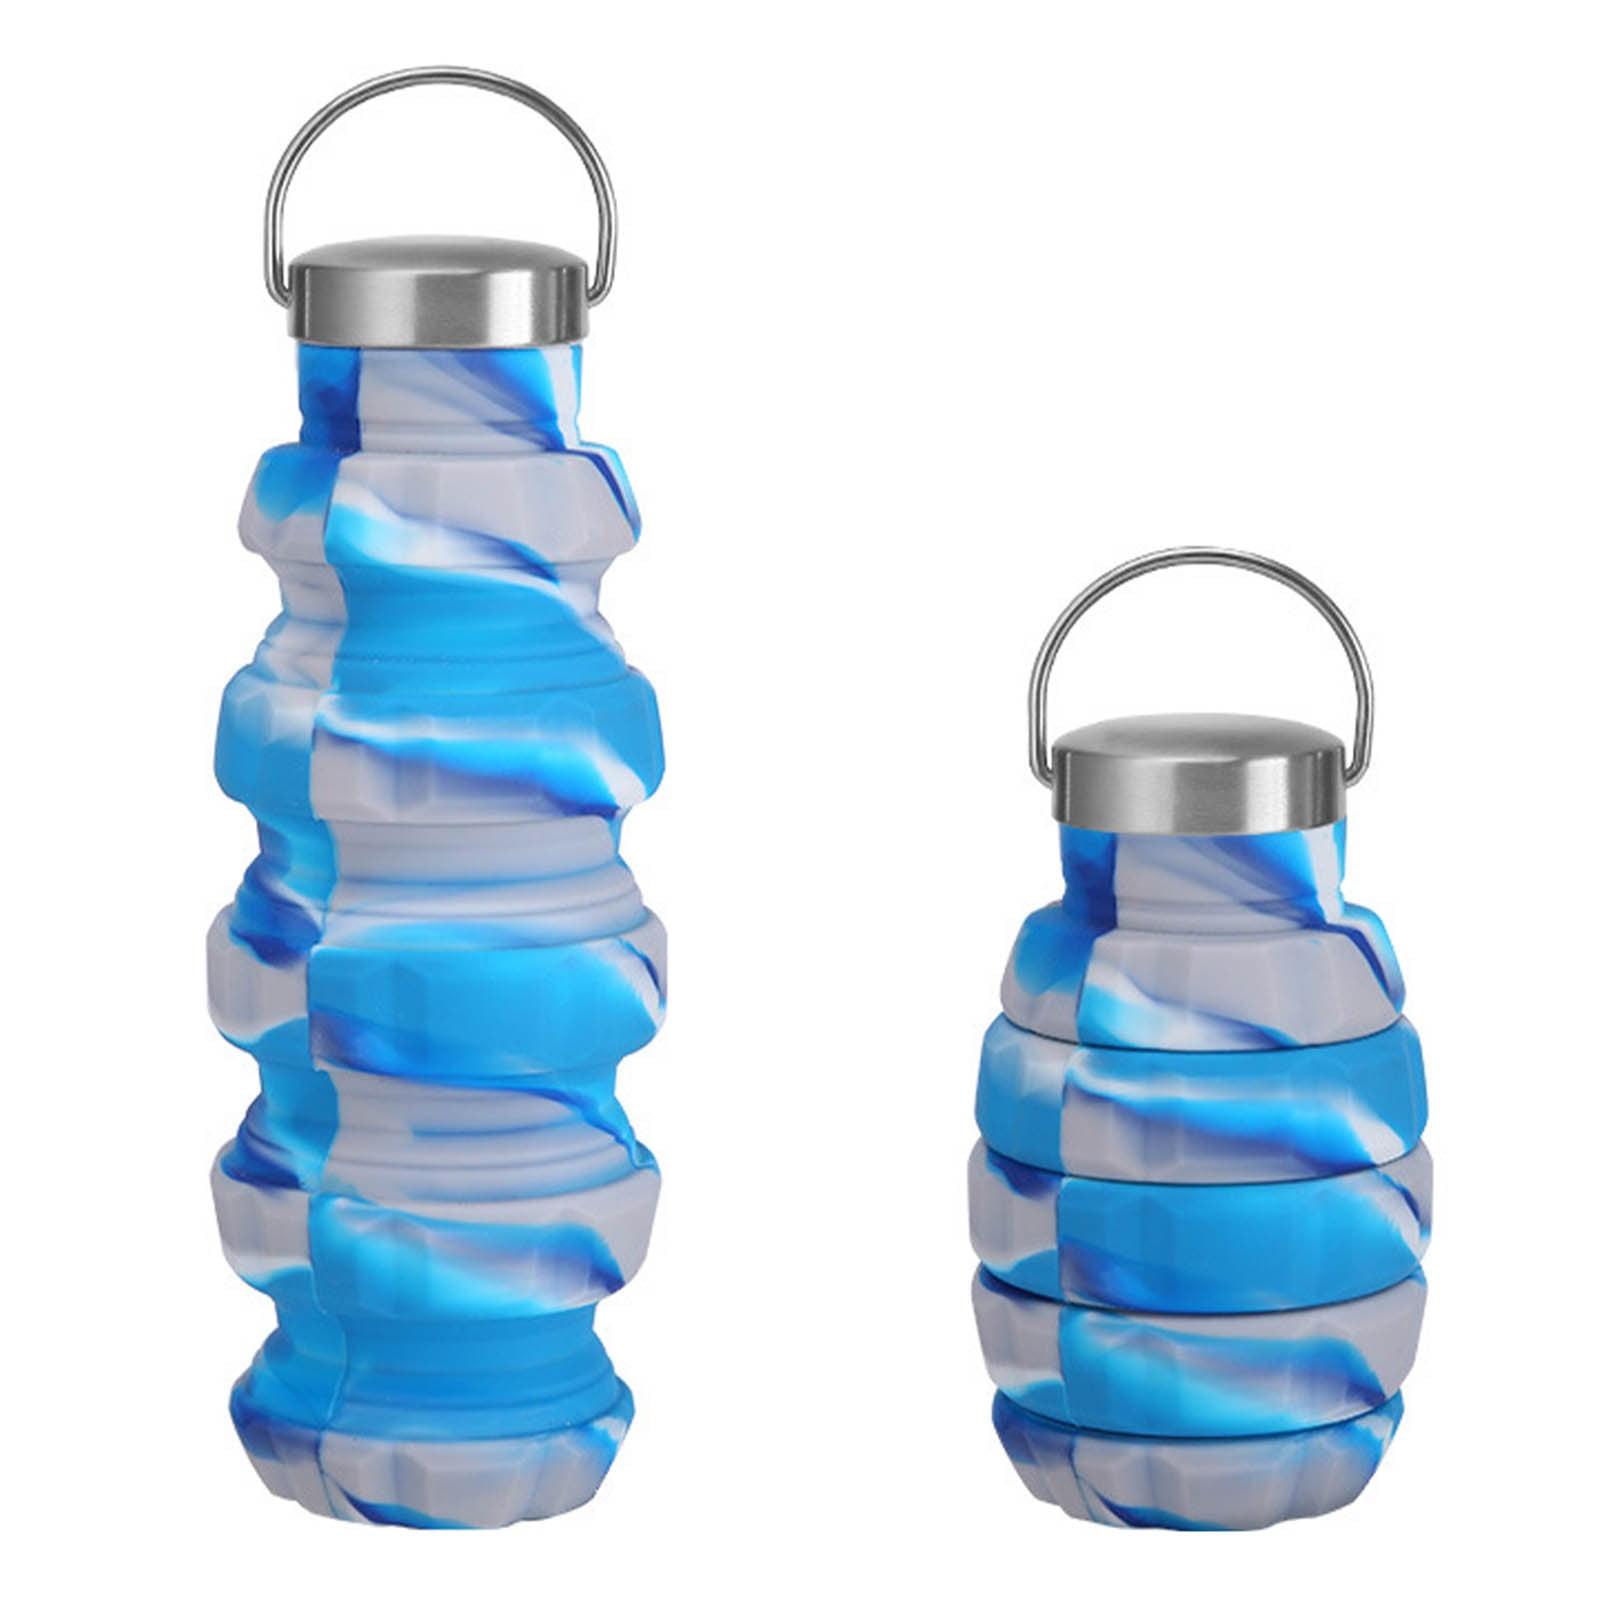  CHENGU 8 Pcs Collapsible Water Bottles Silicone Travel Water  Bottle 16 oz Reusable Leakproof Foldable Water Bottles with Clip for  Camping Hiking Cycling Travel Gym Yoga Outdoor Sports : Sports & Outdoors